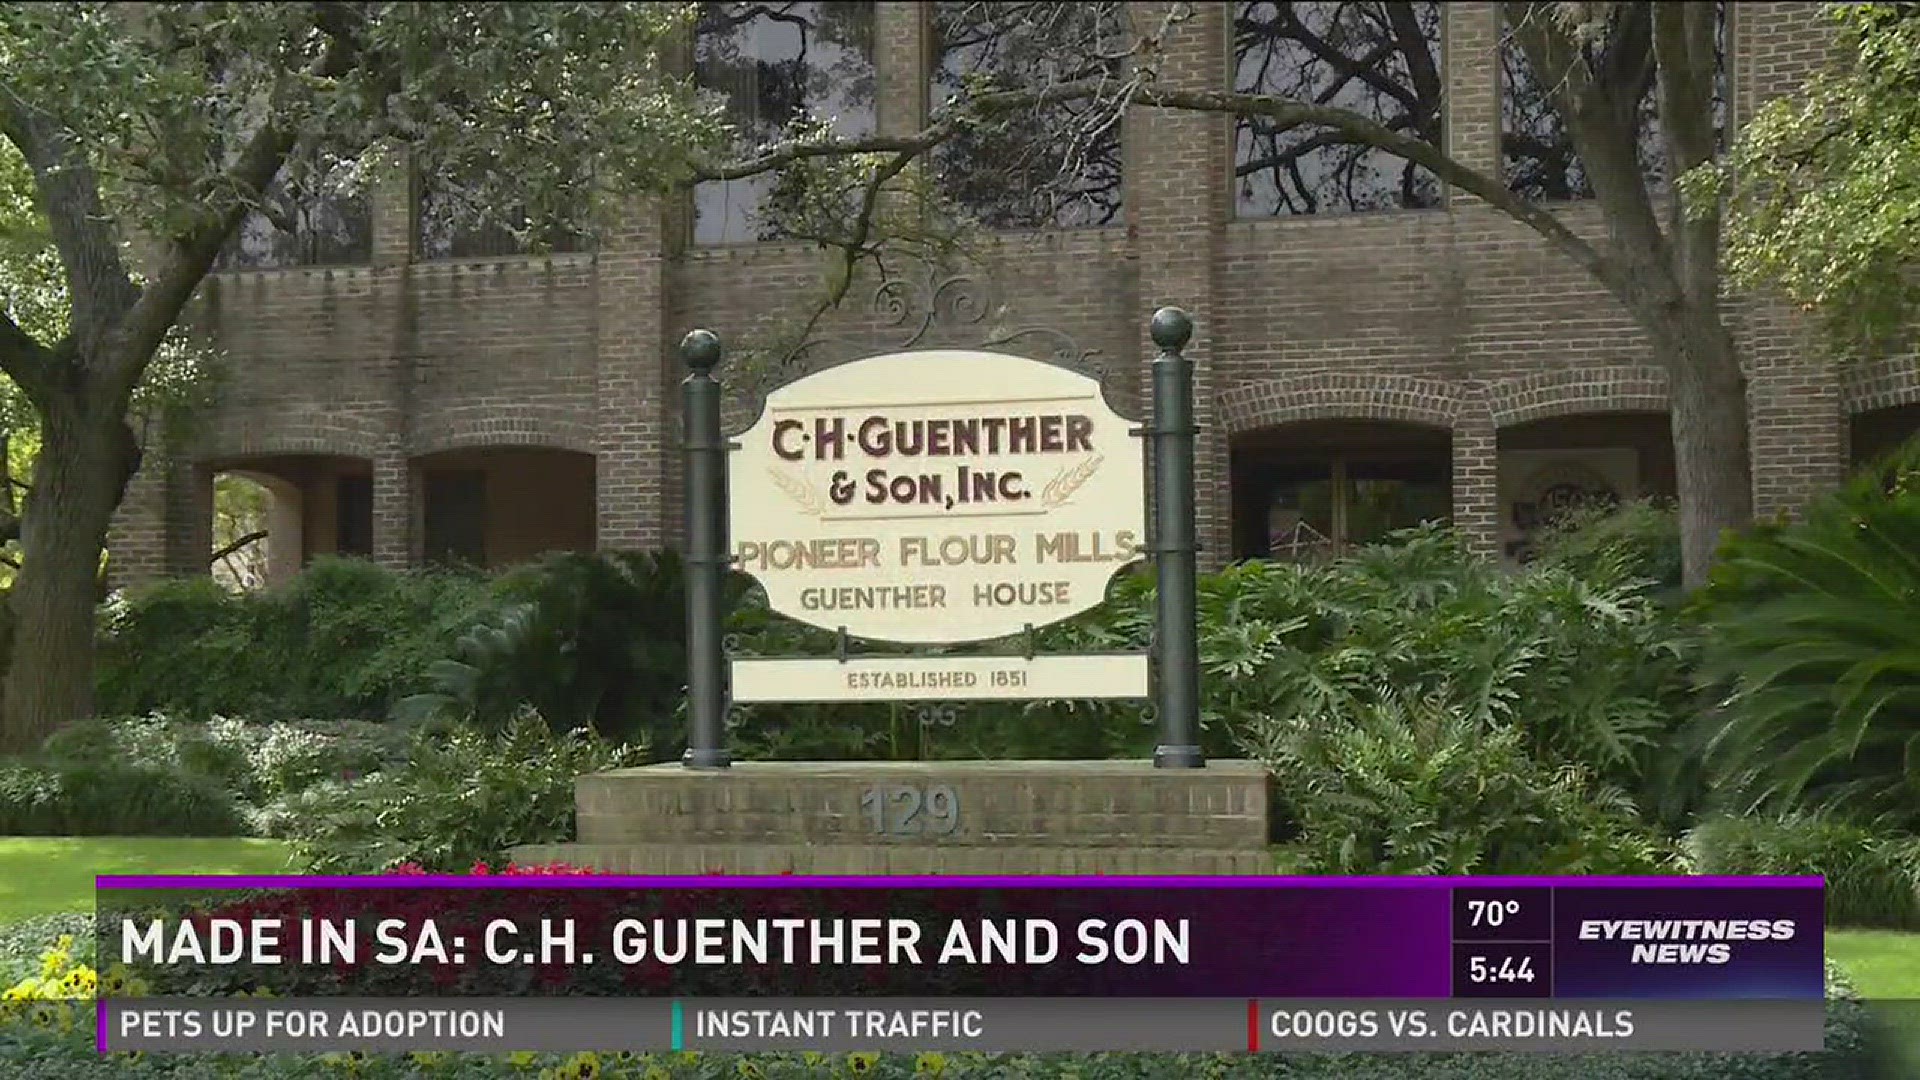 Made in S.A.: C.H. Guenther and Son